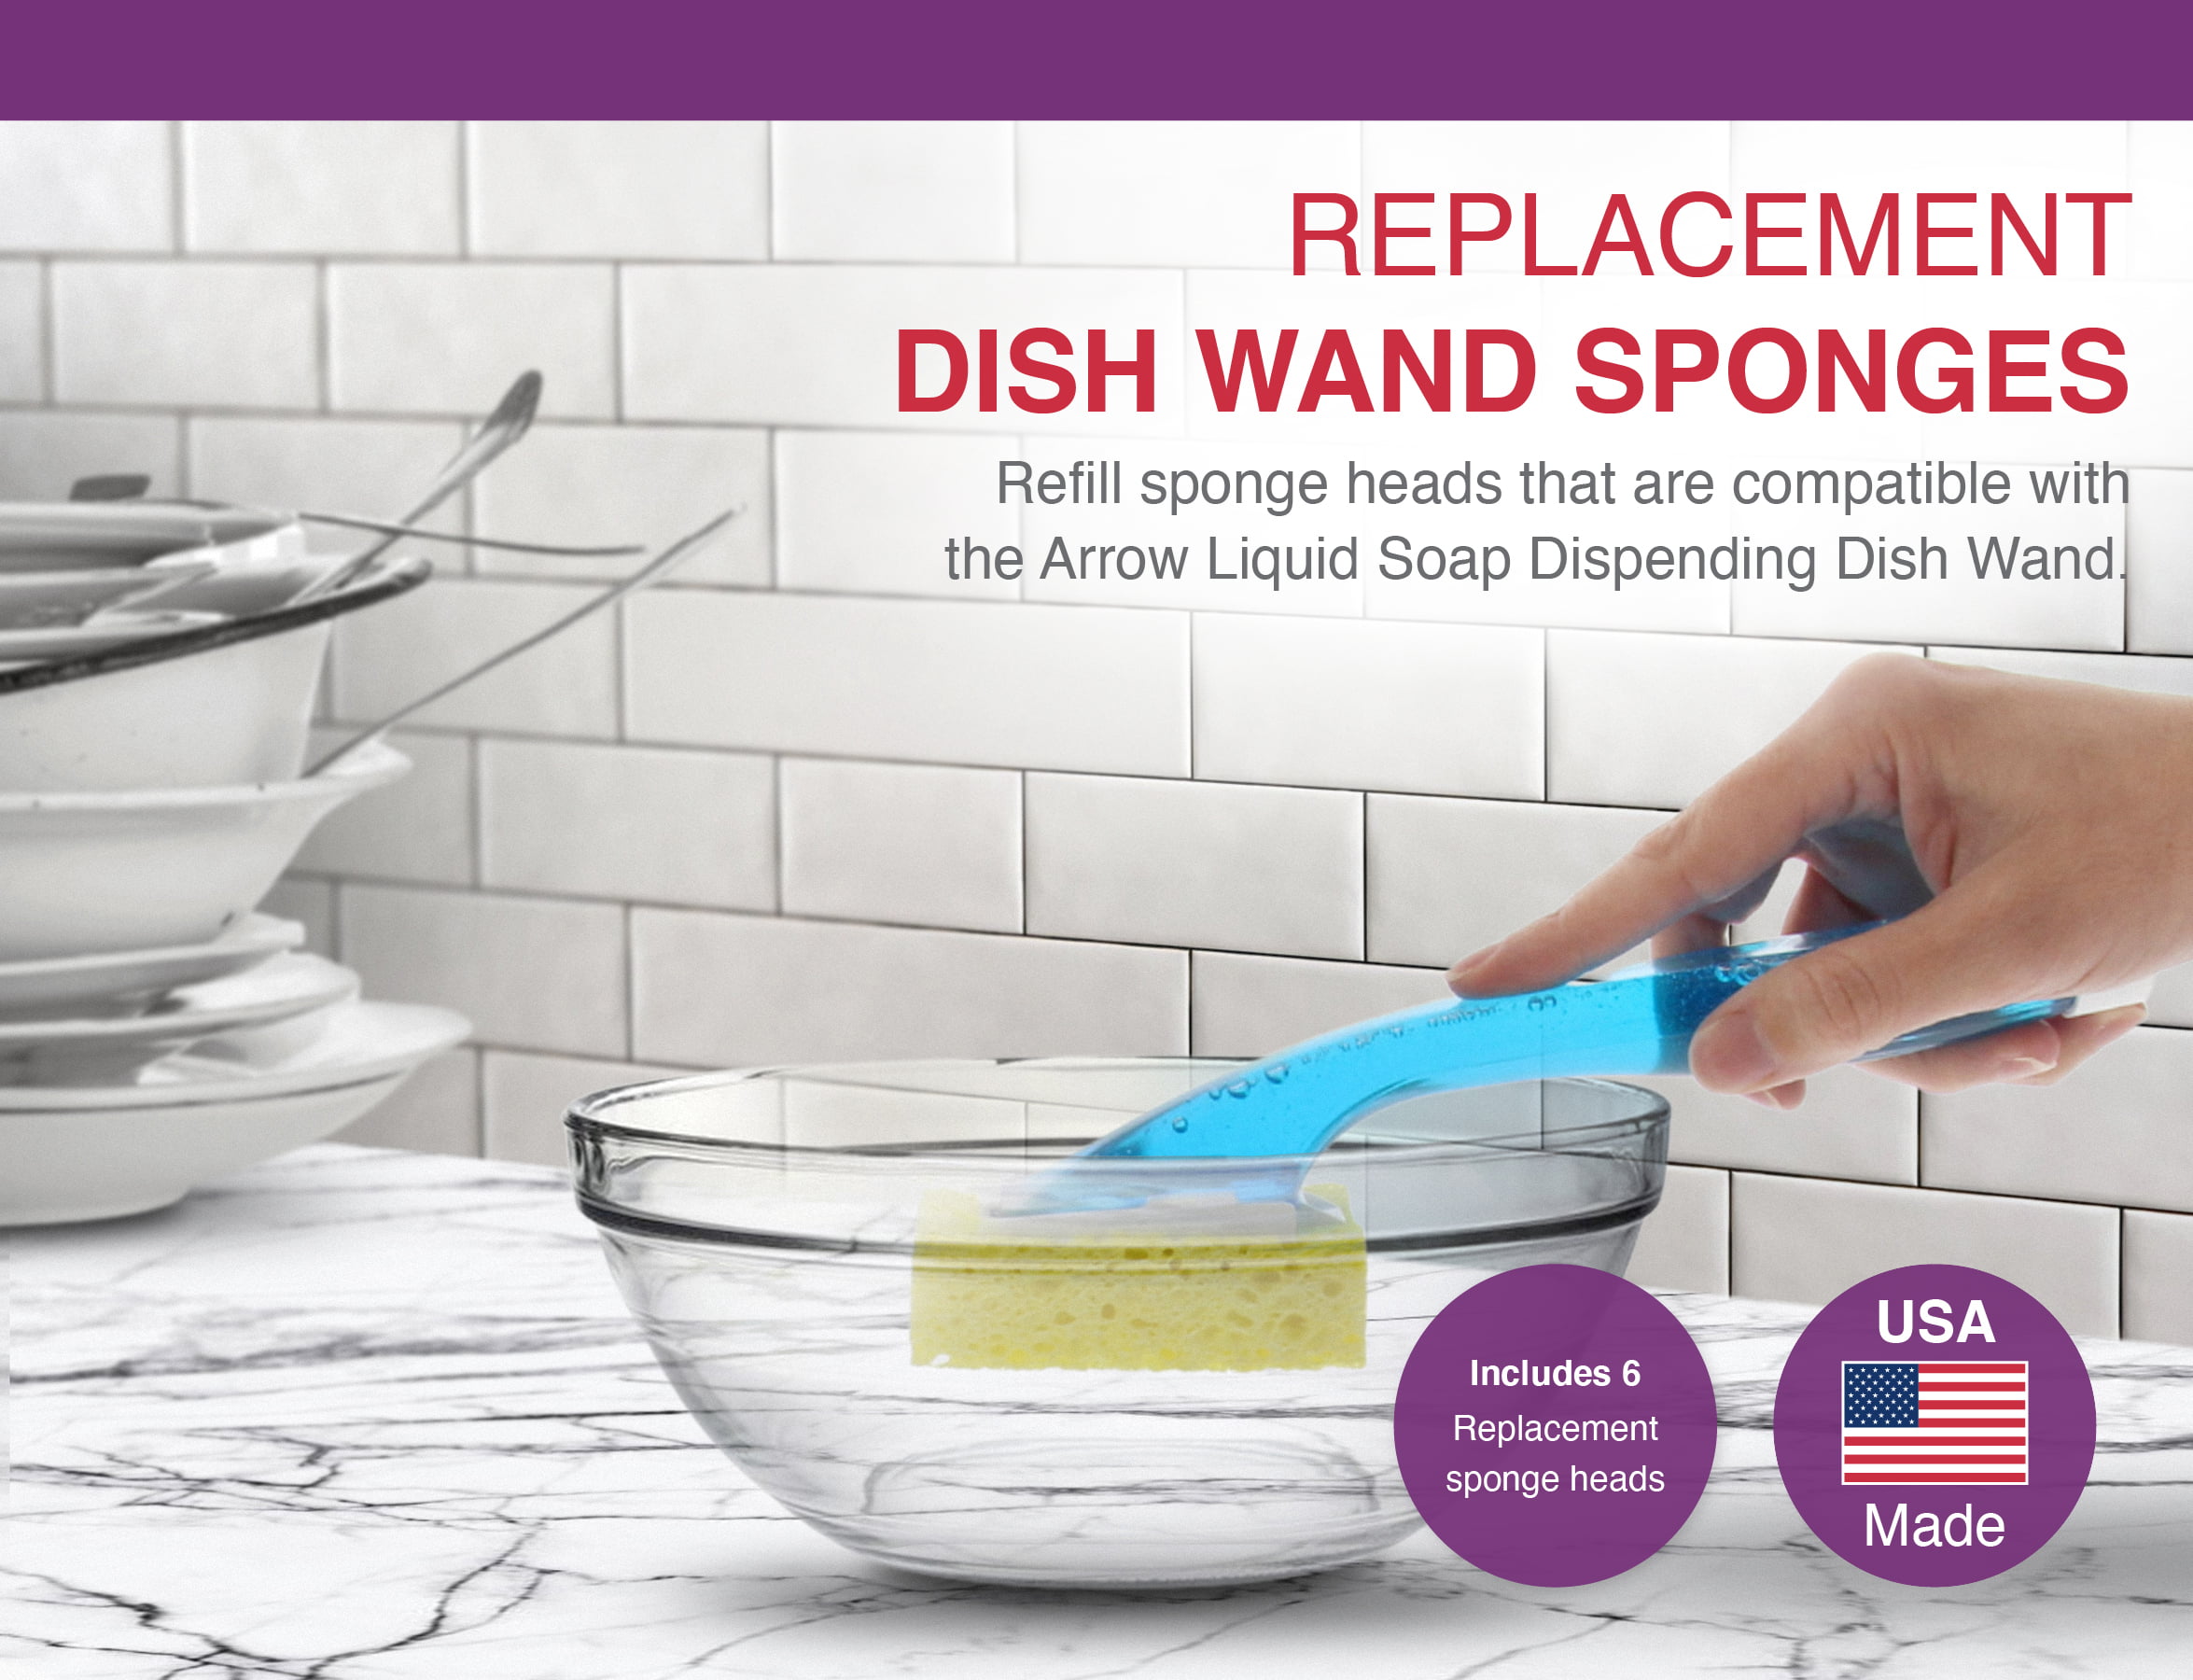 Arrow Dish Sponges With Soap Dispenser Handle, 2 Pack - Fillable Dish Wand  for Quick, Convenient Cleaning - Made in the USA - Easy to Refill, Built-In